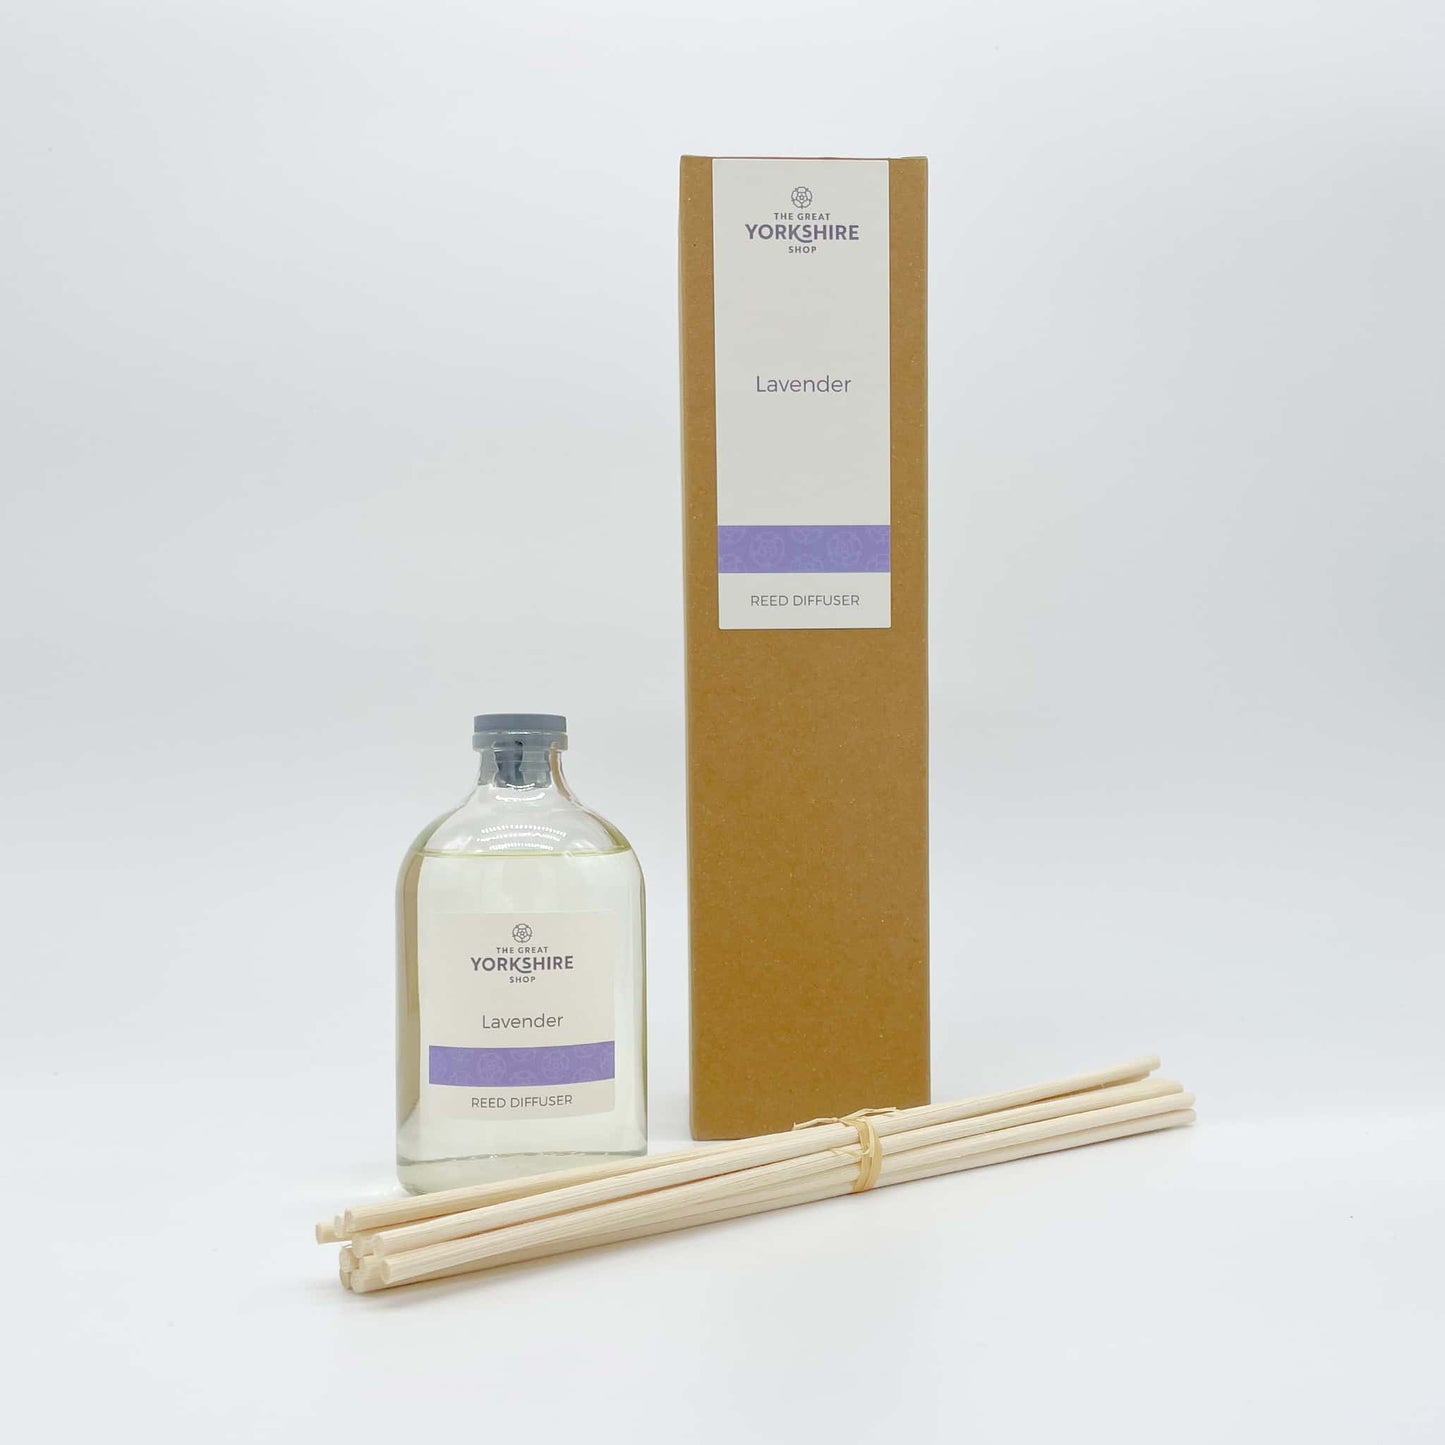 Lavender Reed Diffuser - The Great Yorkshire Shop